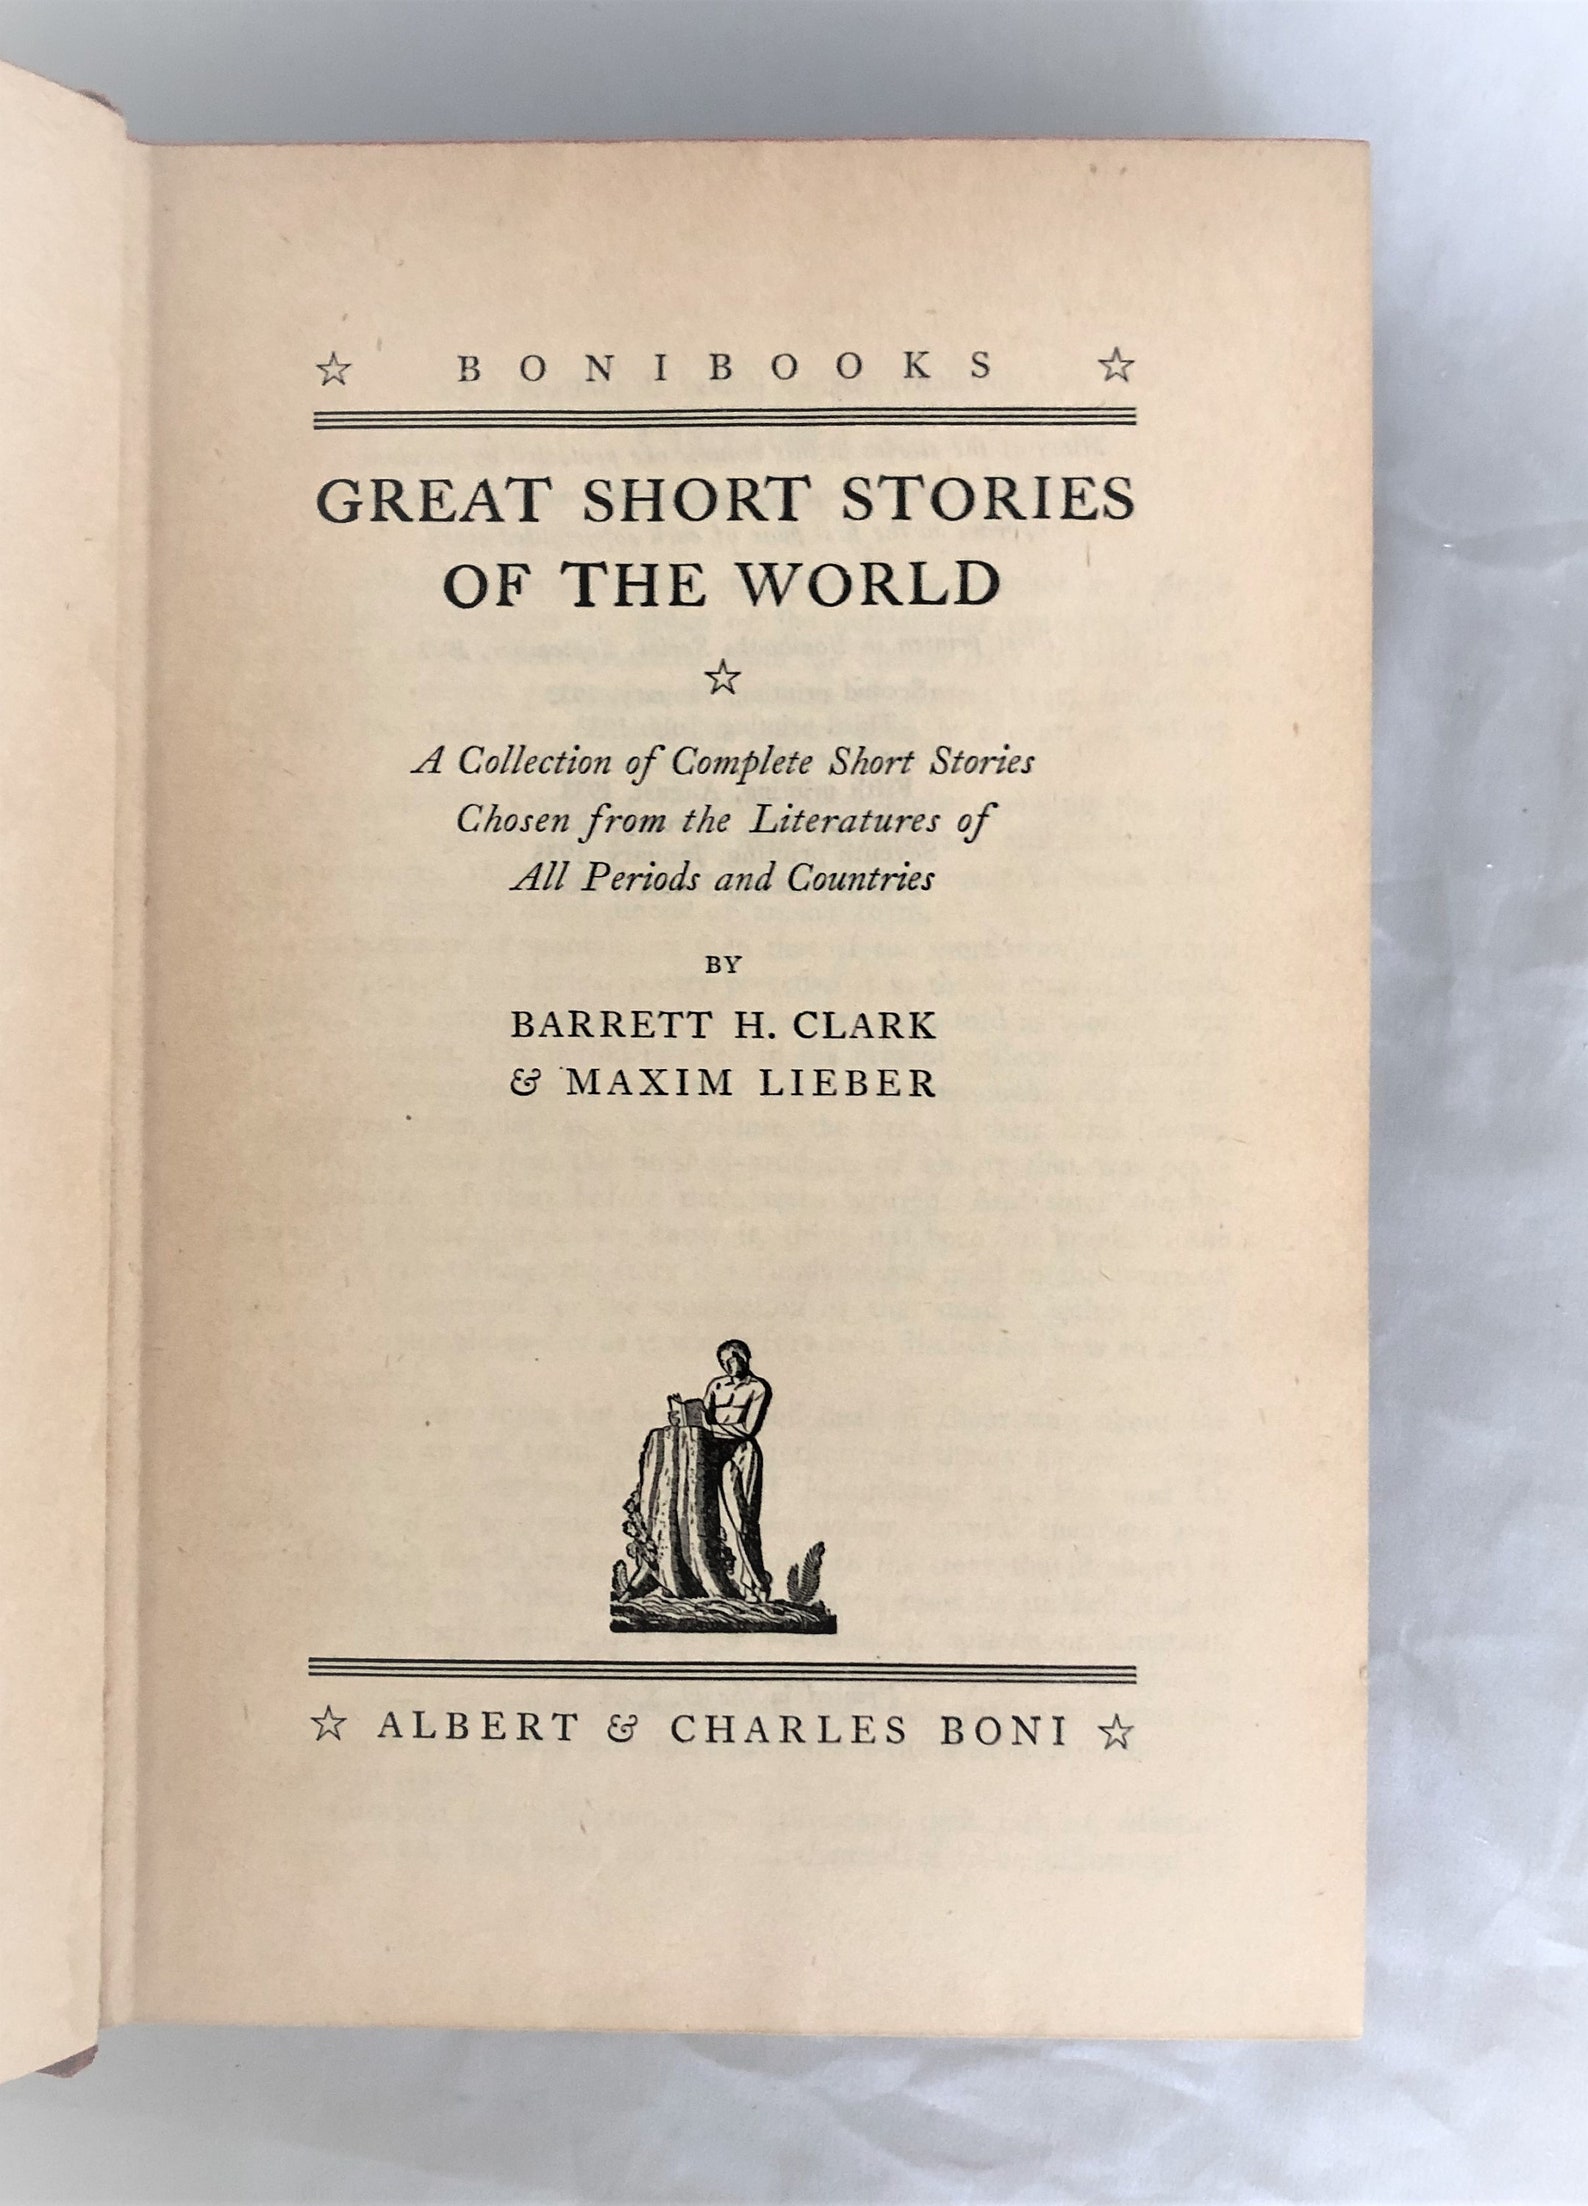 great short stories of the world pdf